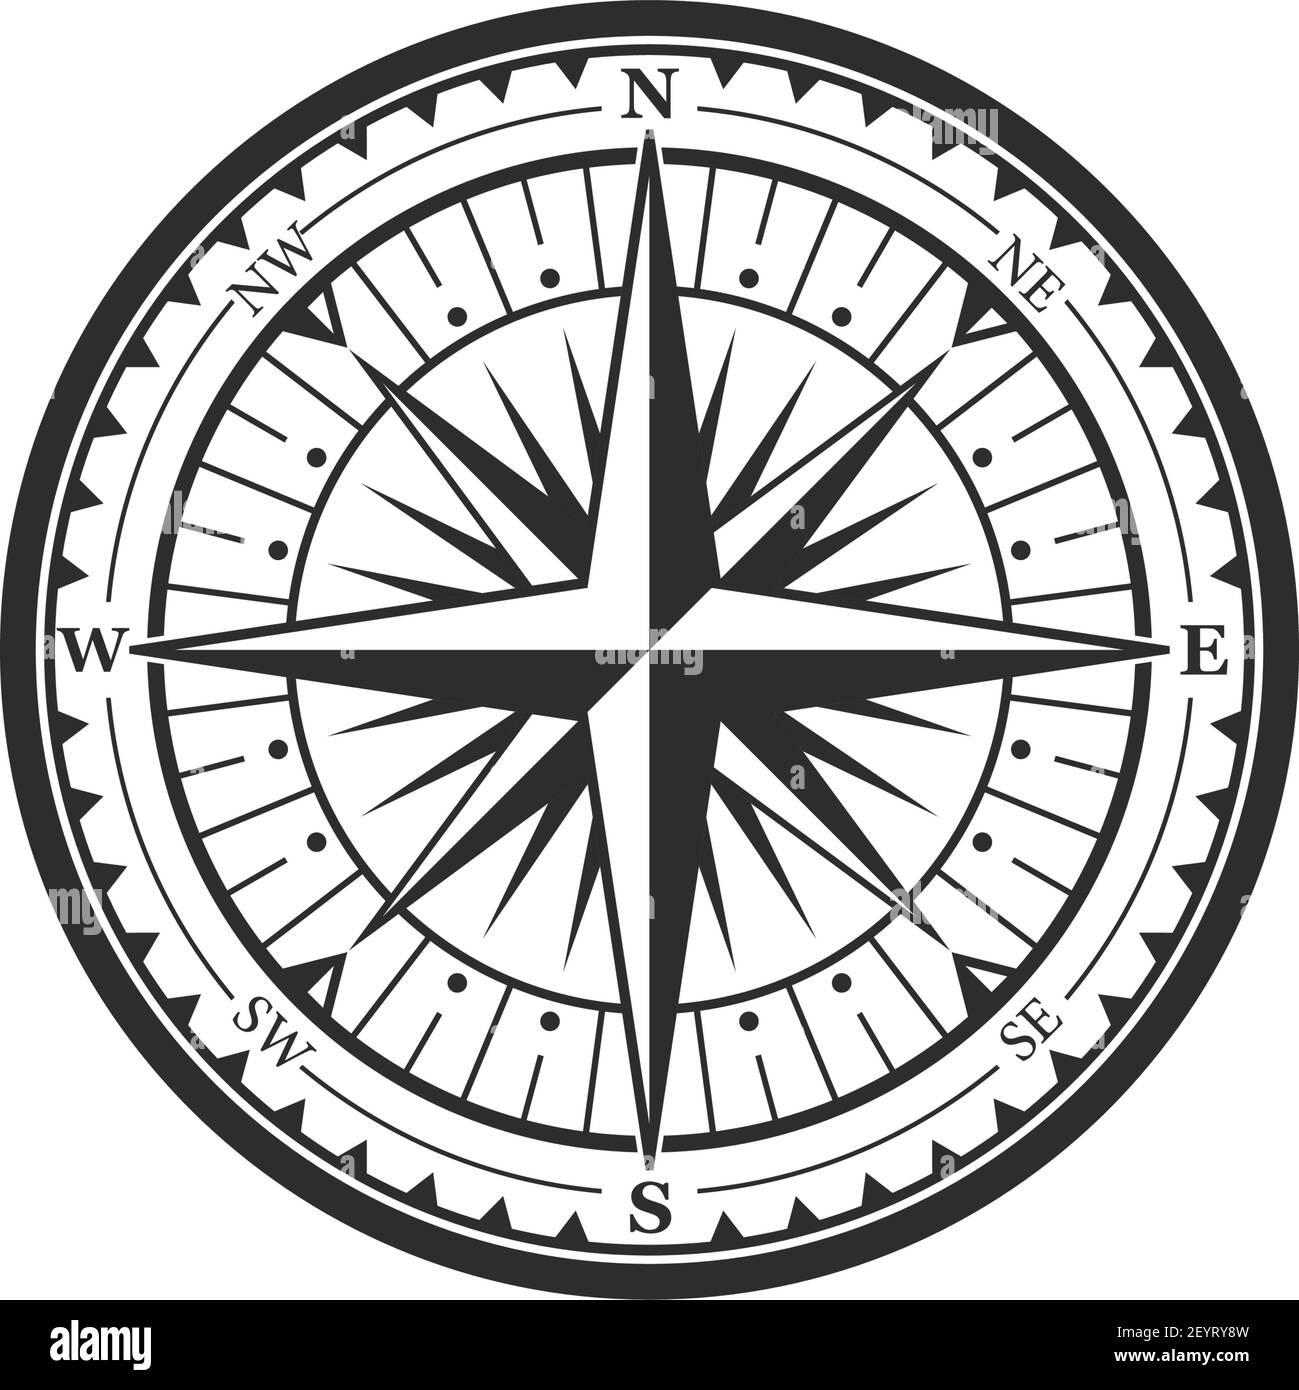 Old navigation compass heraldic icon. Vector Winds Rose symbol of ...